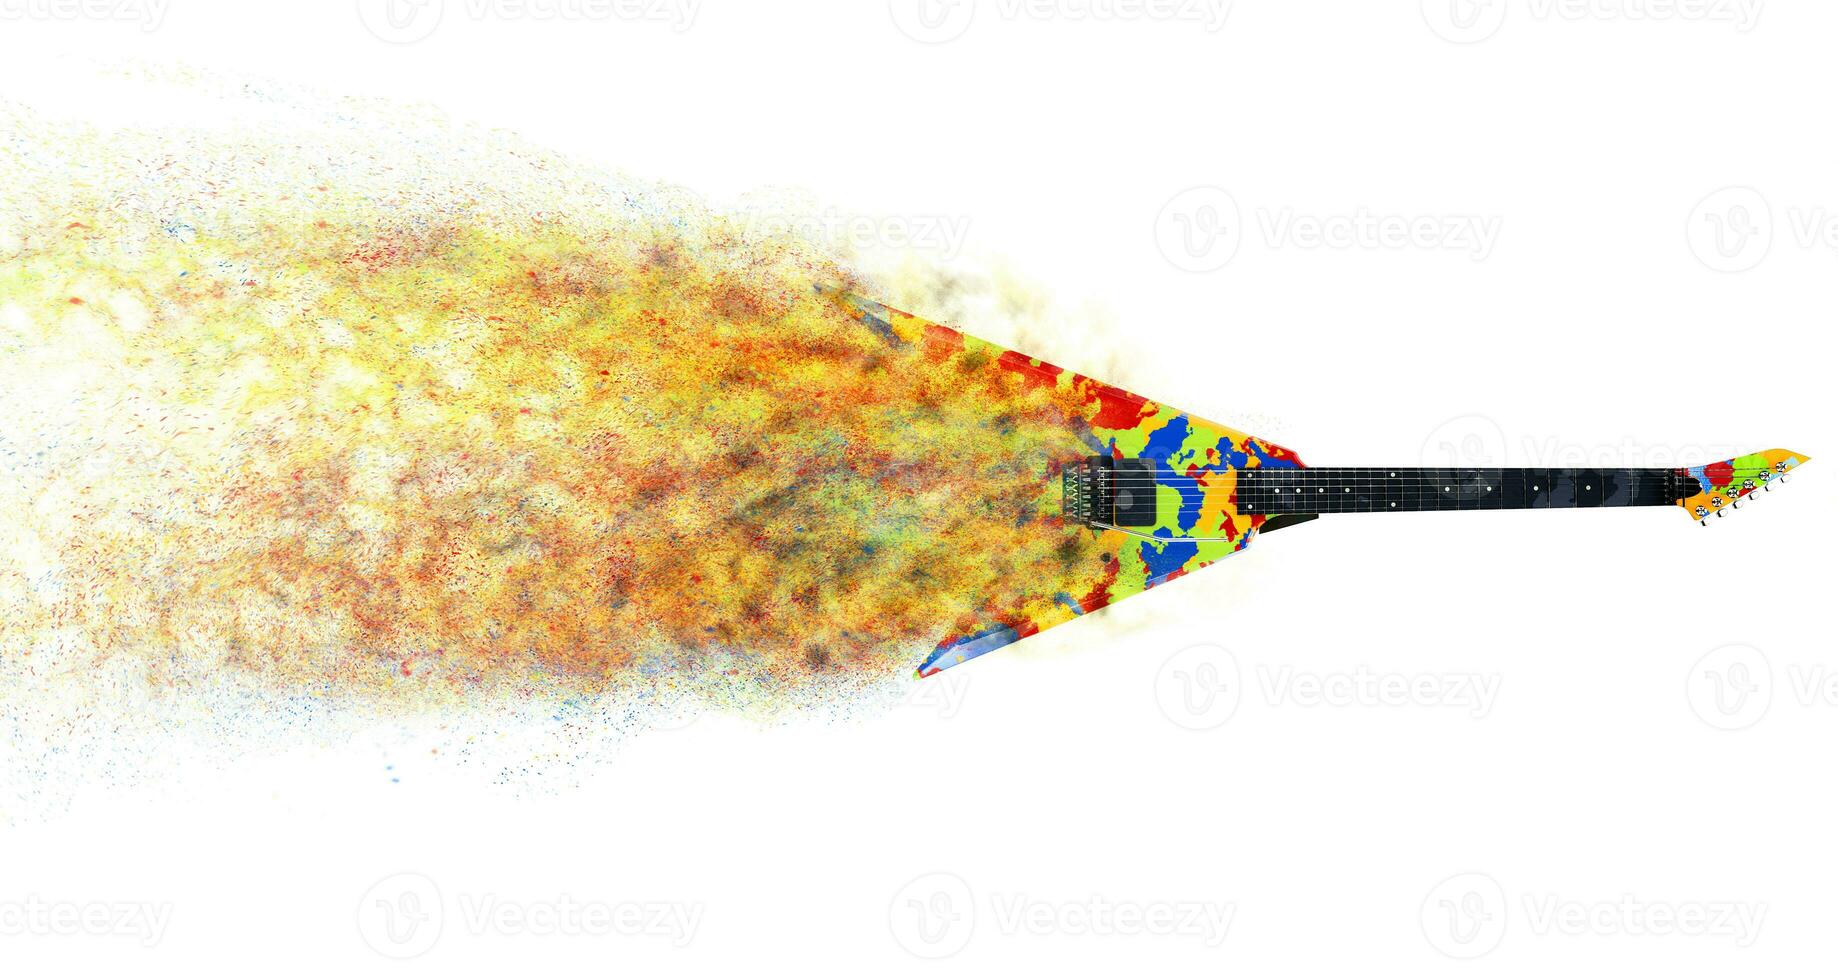 Colorful electric guitar - dust effect photo